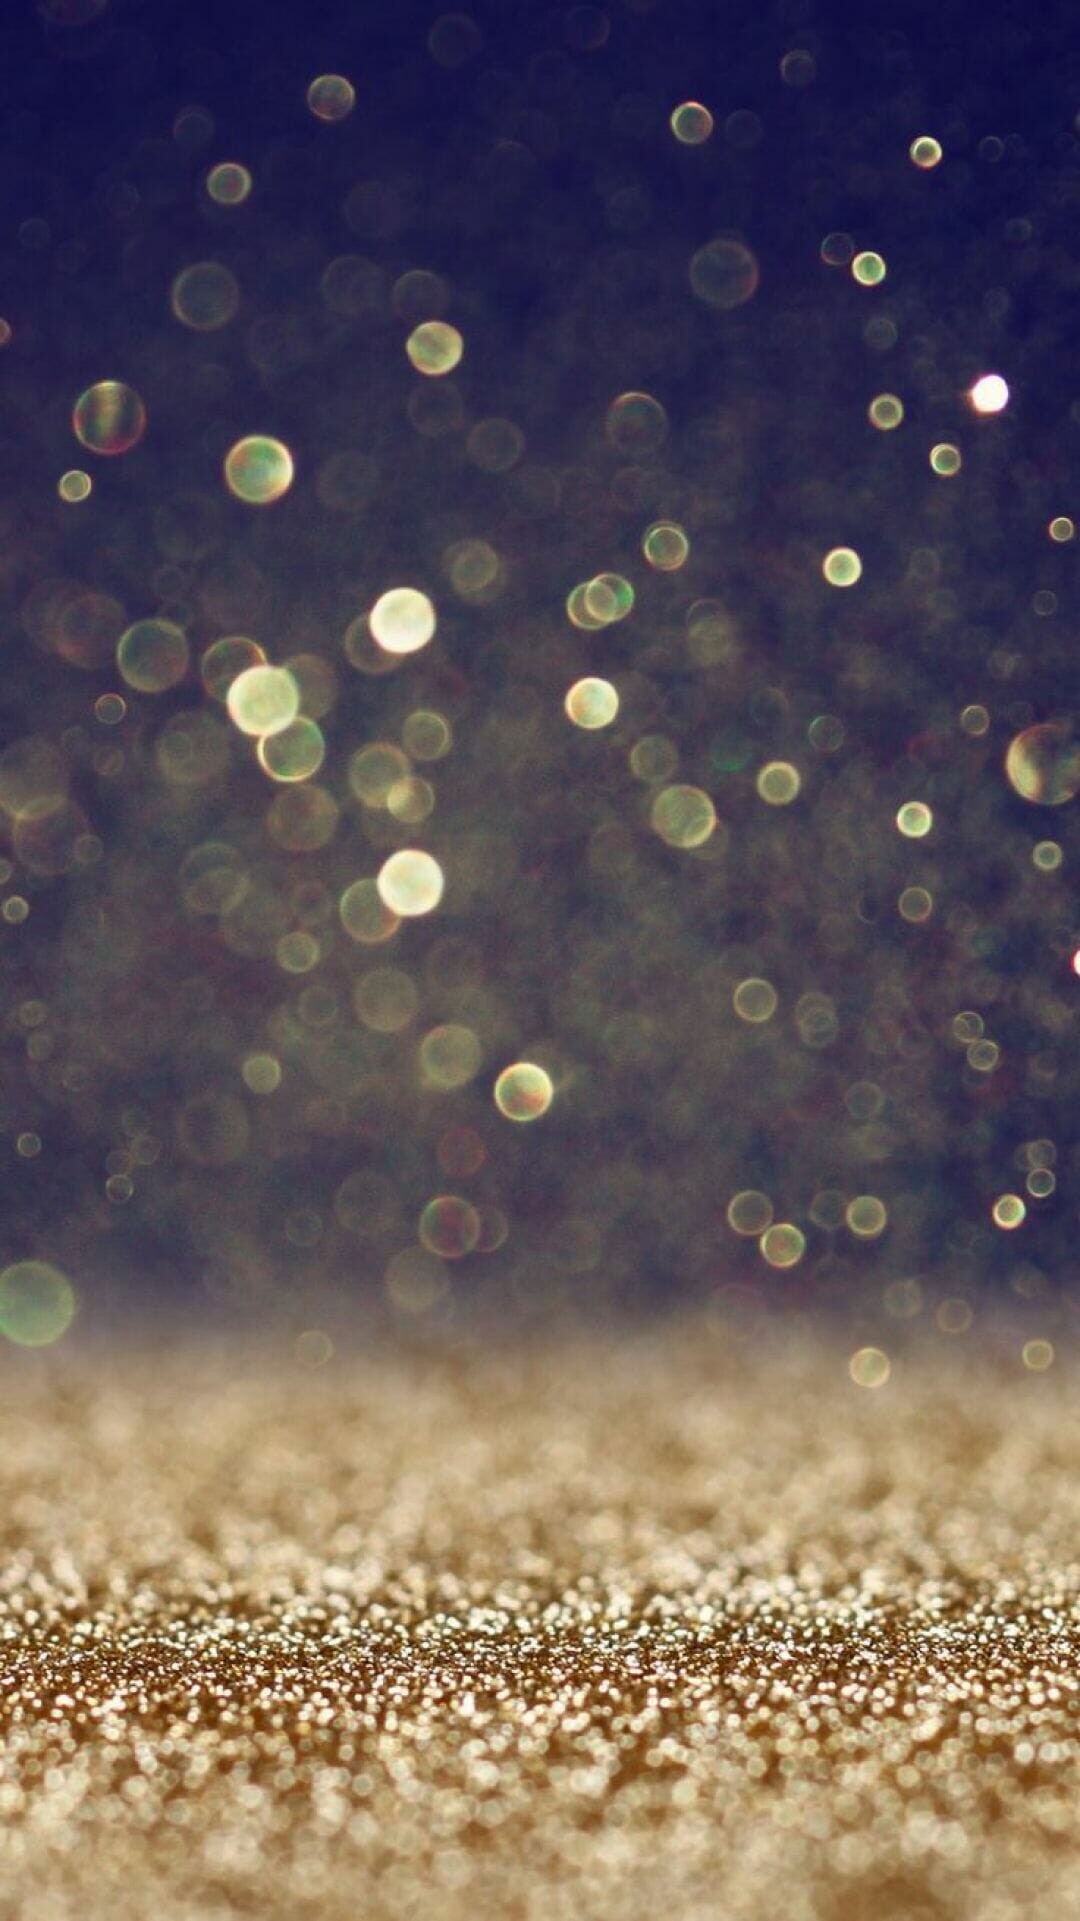 Gold Sparkle: Glitter, A substance consisting of small, reflective particles, Shiny decoration. 1080x1930 HD Wallpaper.